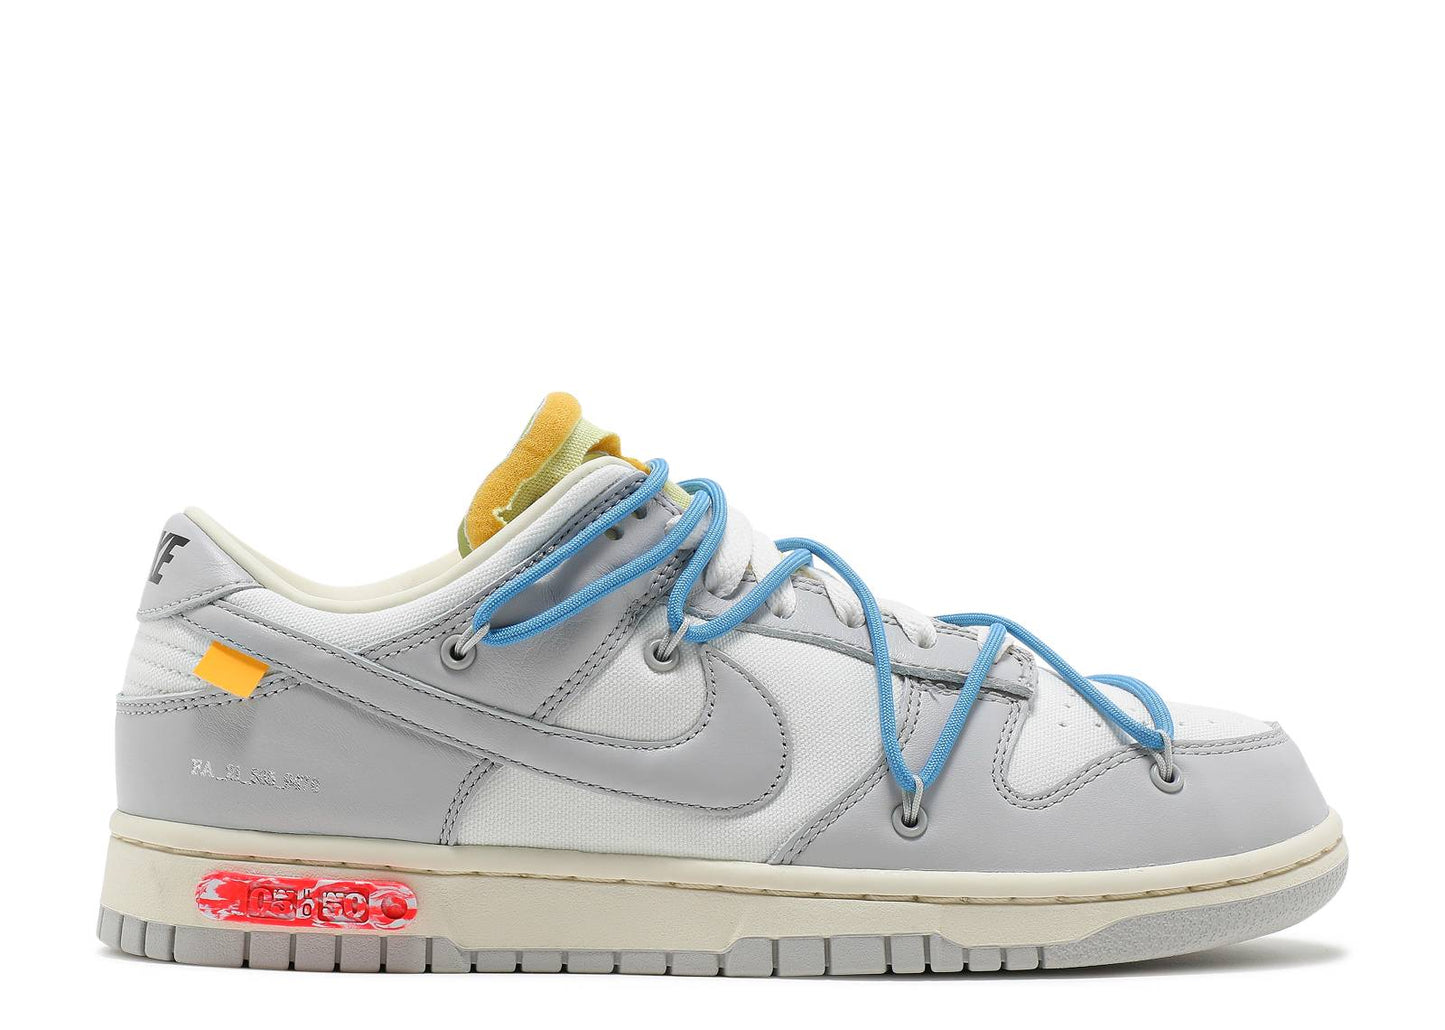 Off-White x Dunk Low Lot 05 of 50